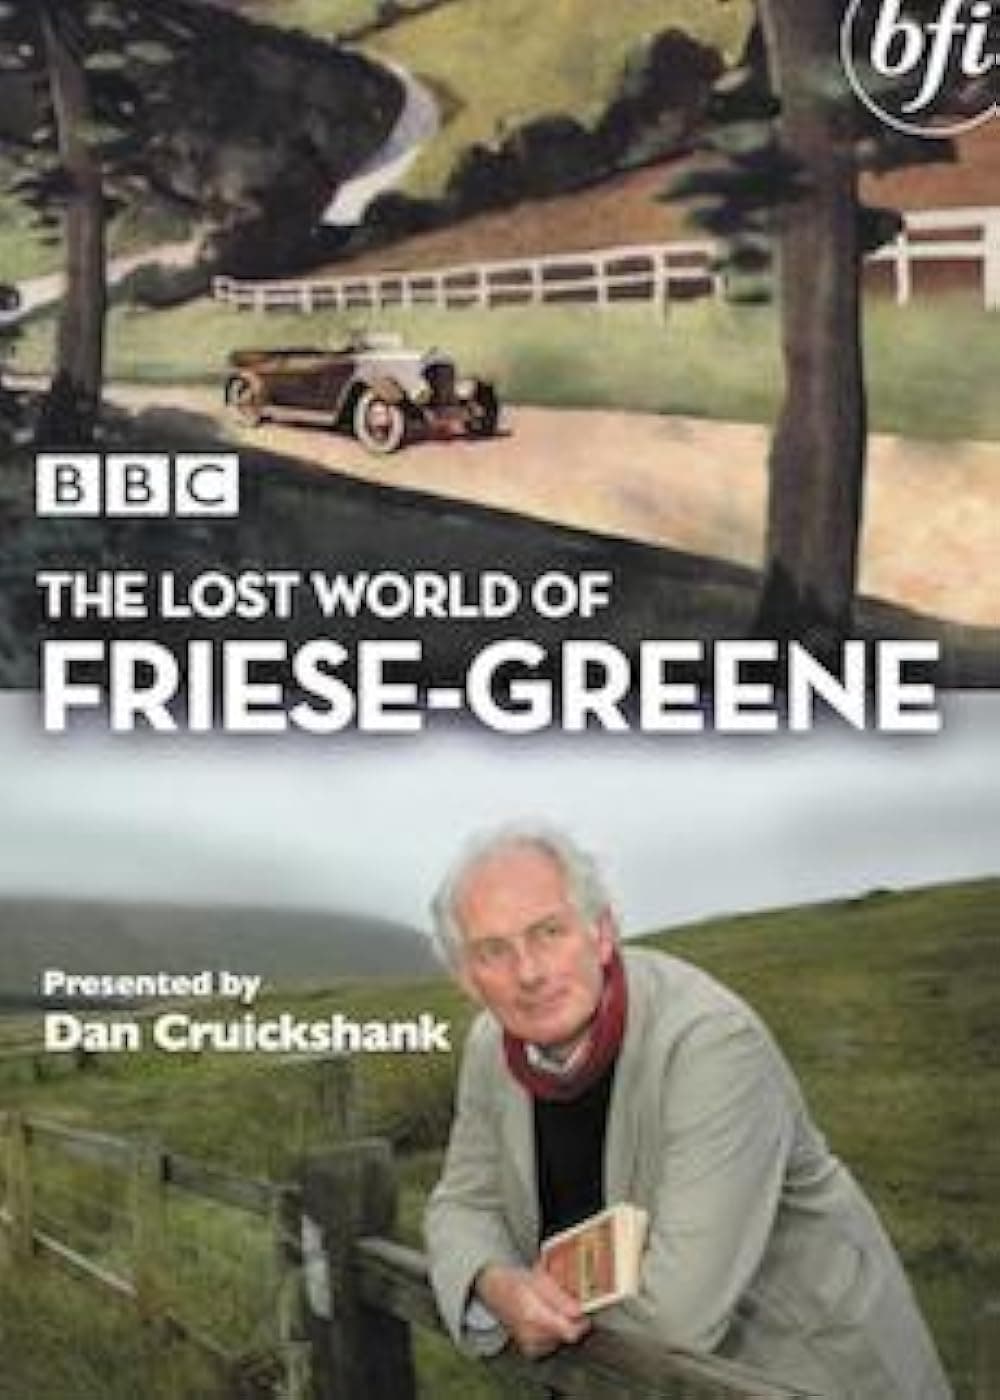 The Lost World of Friese-Greene